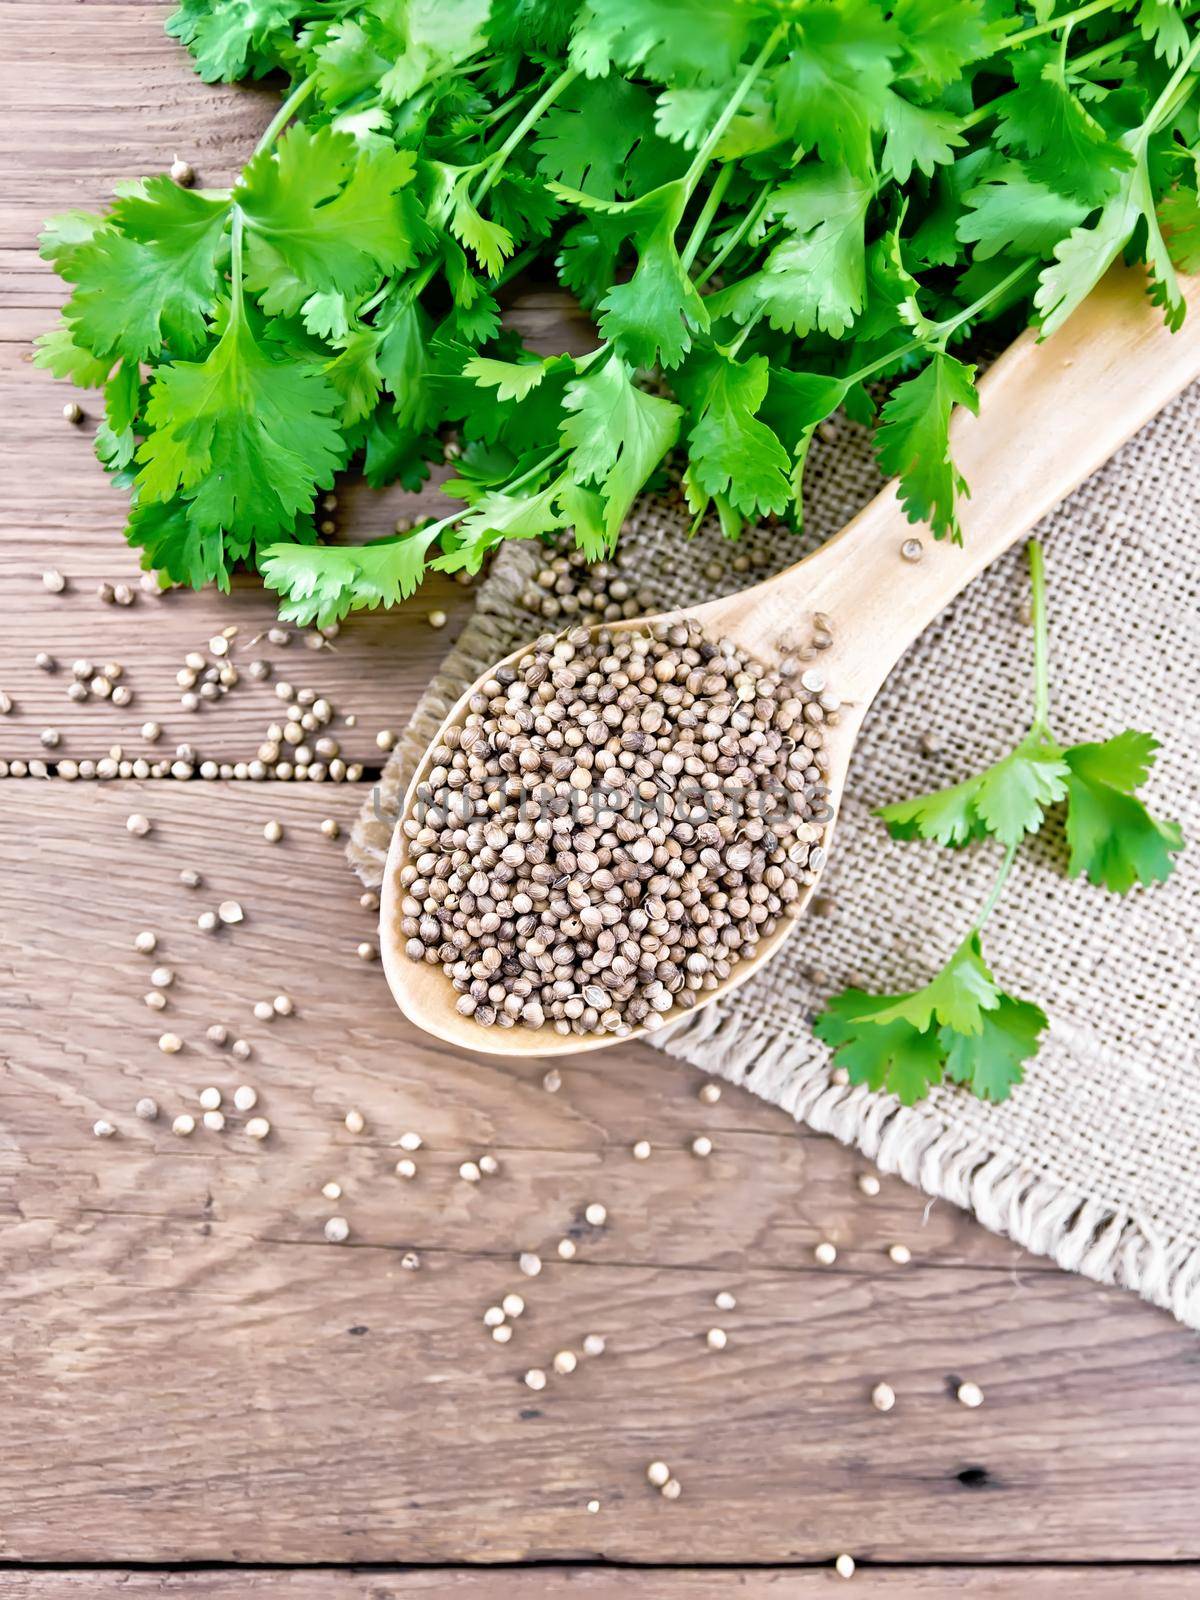 Coriander seeds in a spoon on burlap, green fresh cilantro on background of an old wooden board from above